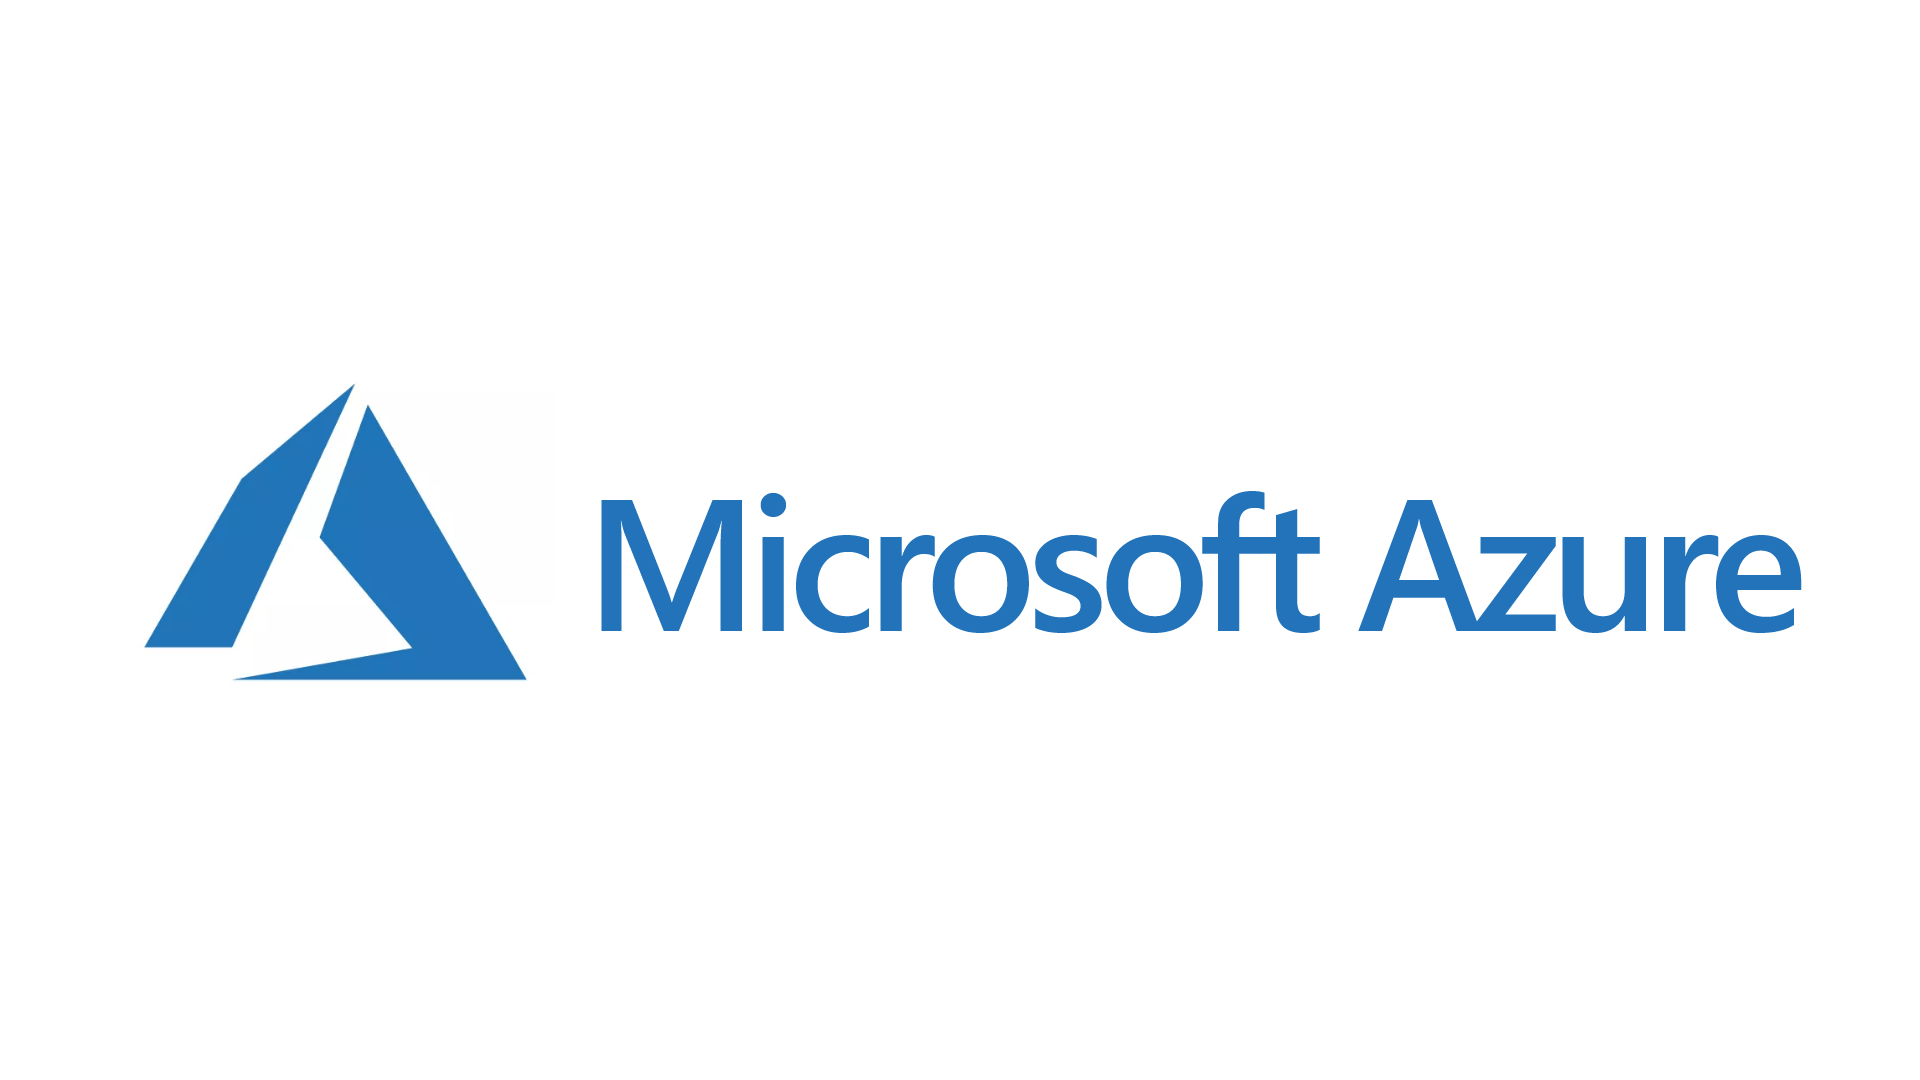 How To Ace The Microsoft Azure 70